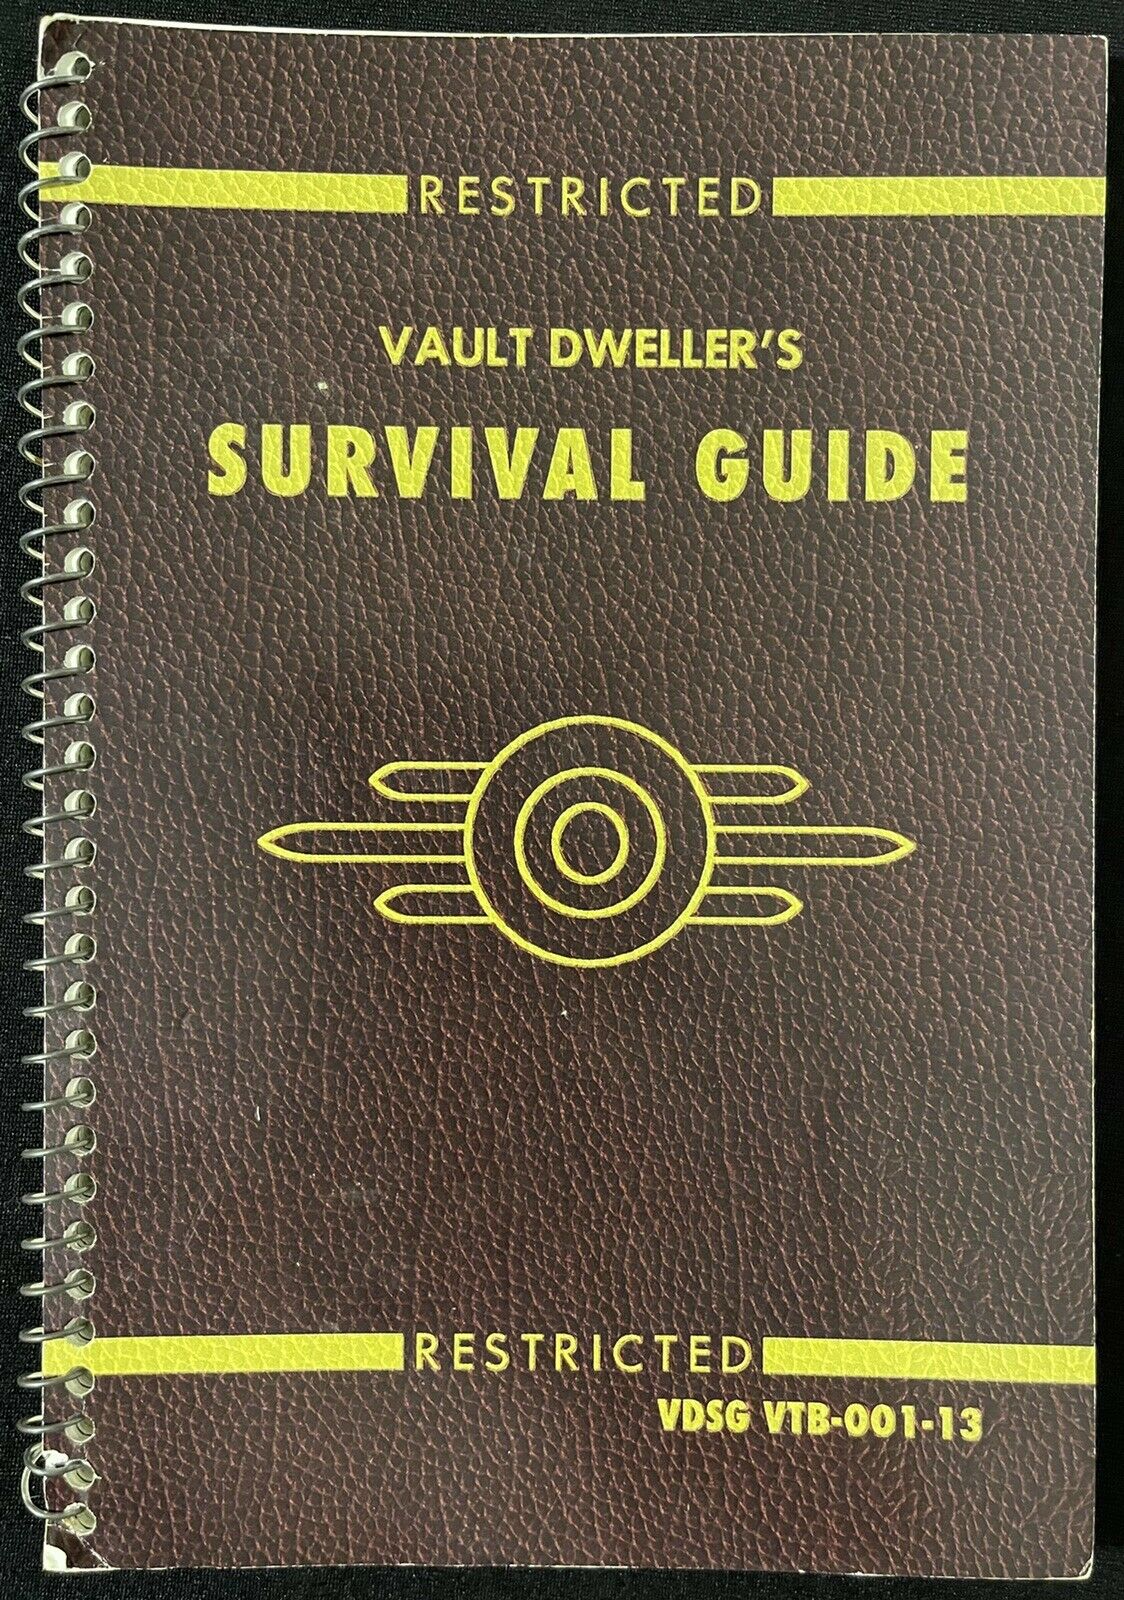 Rare Fallout 1 Vault Dweller's Survival Guide Book - 1997 Spiral Bound Pc Game